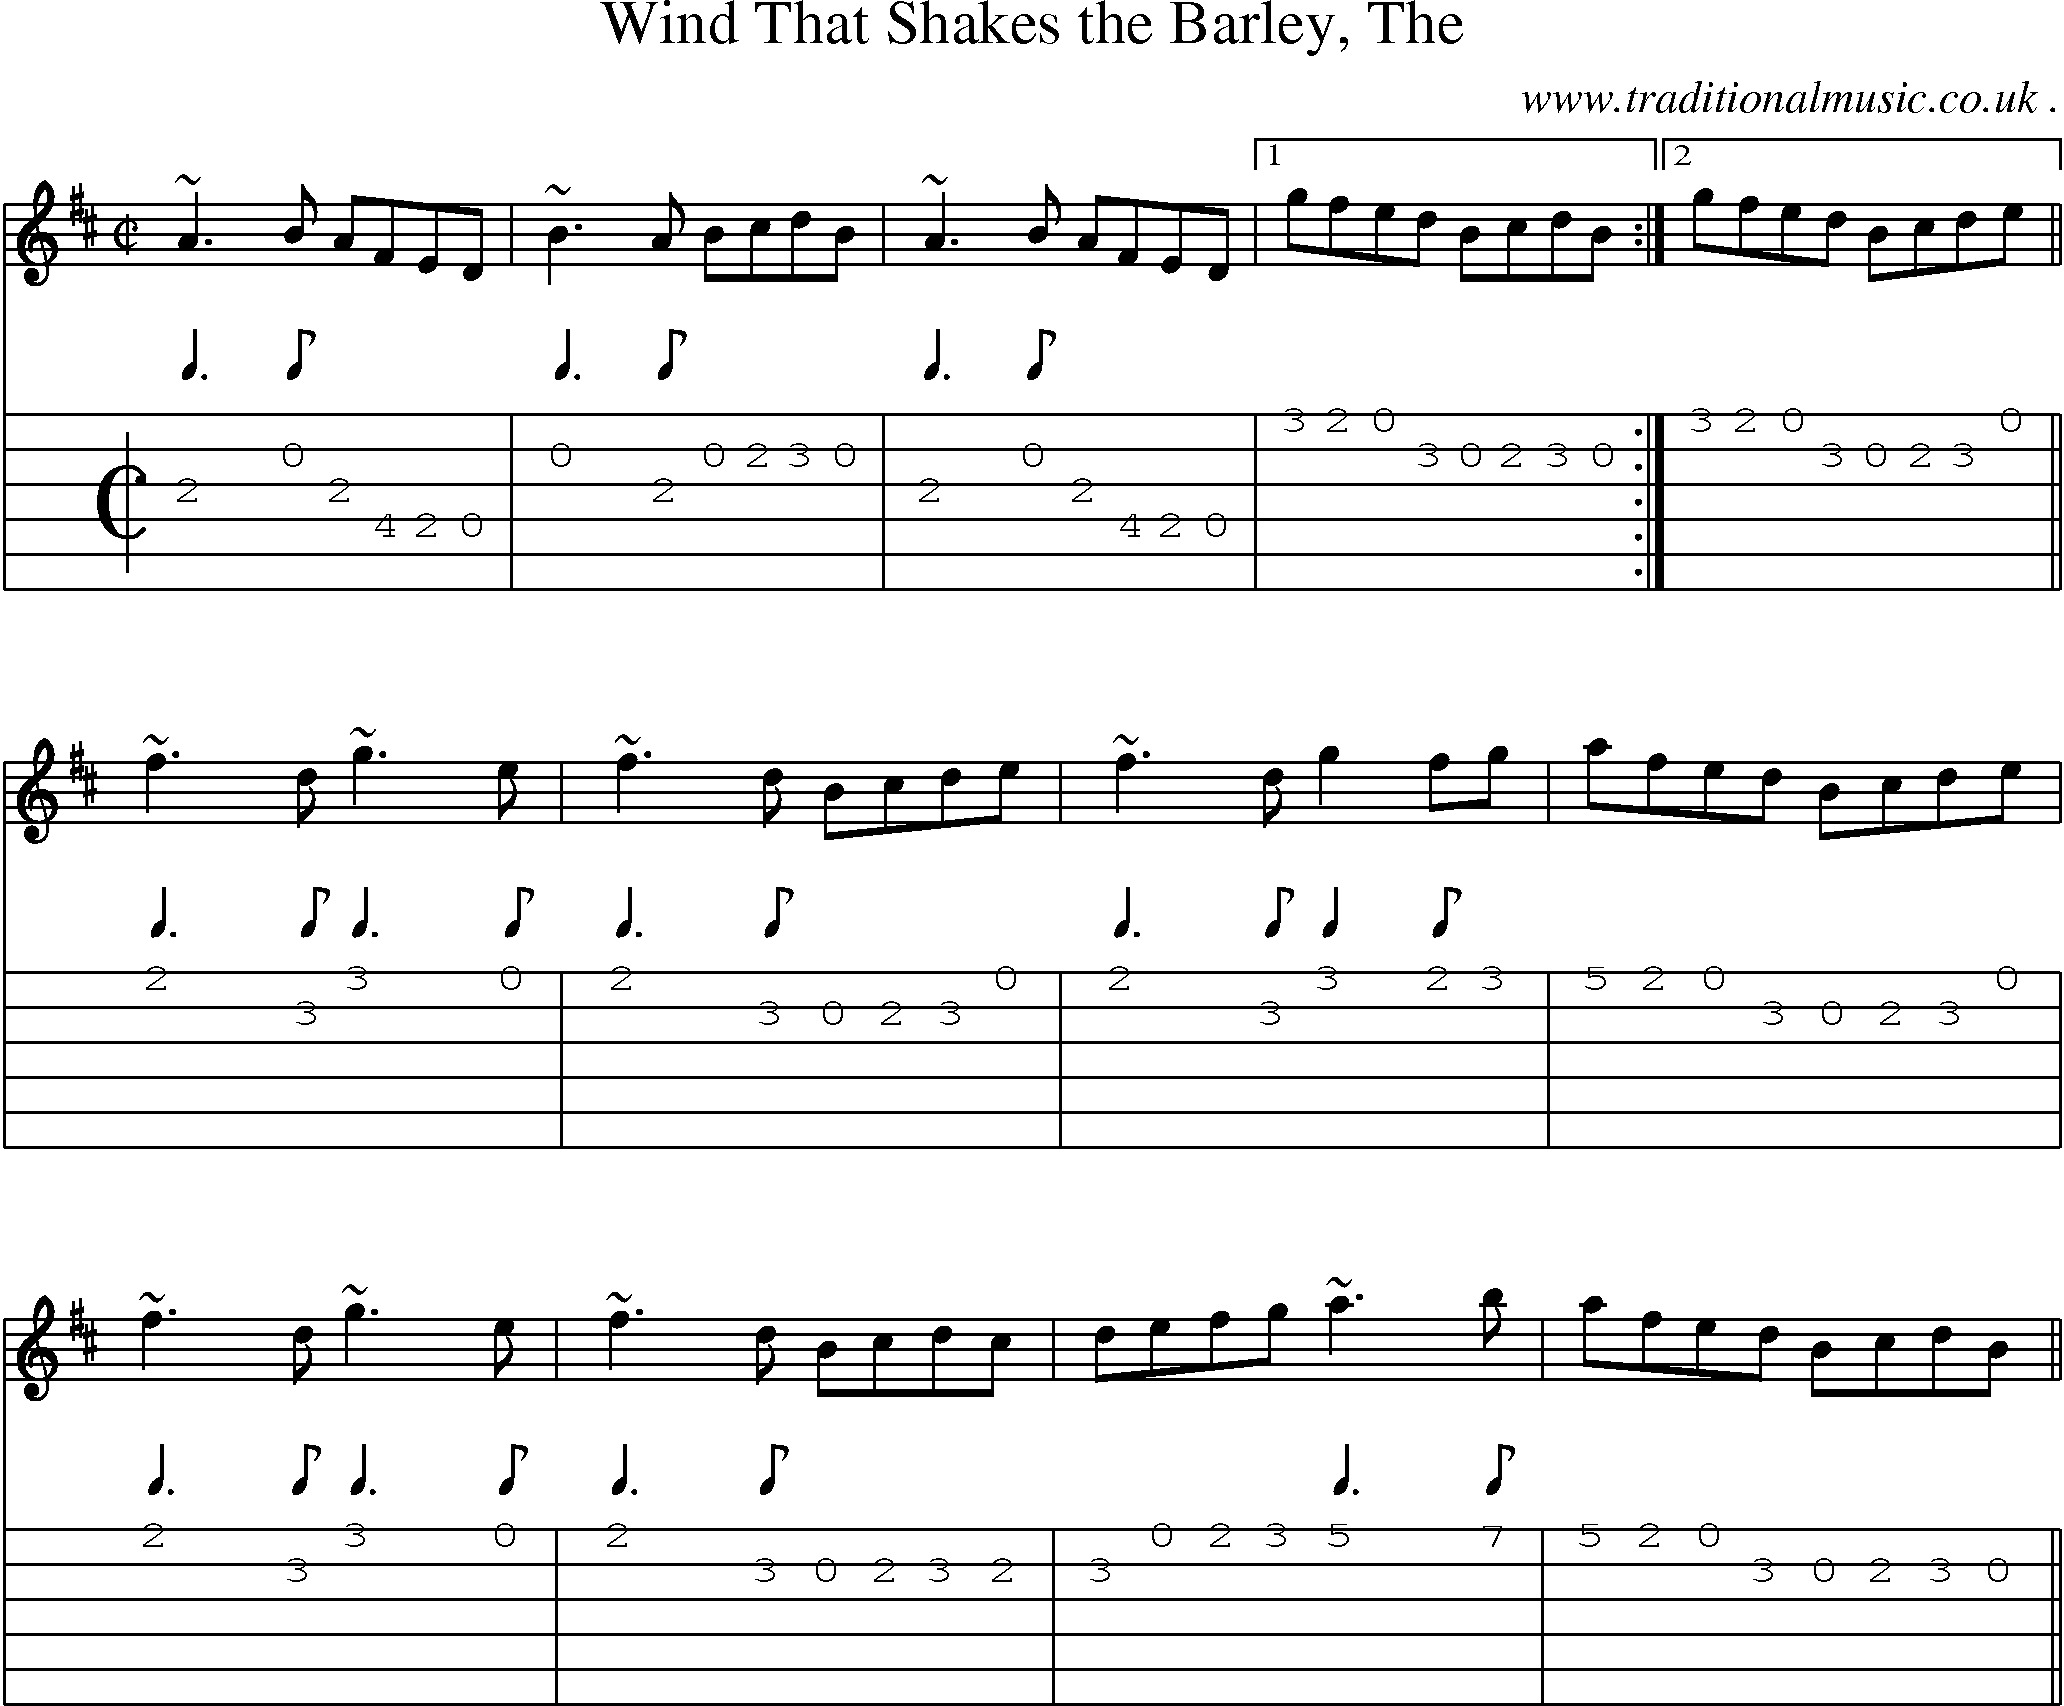 Sheet-music  score, Chords and Guitar Tabs for Wind That Shakes The Barley The